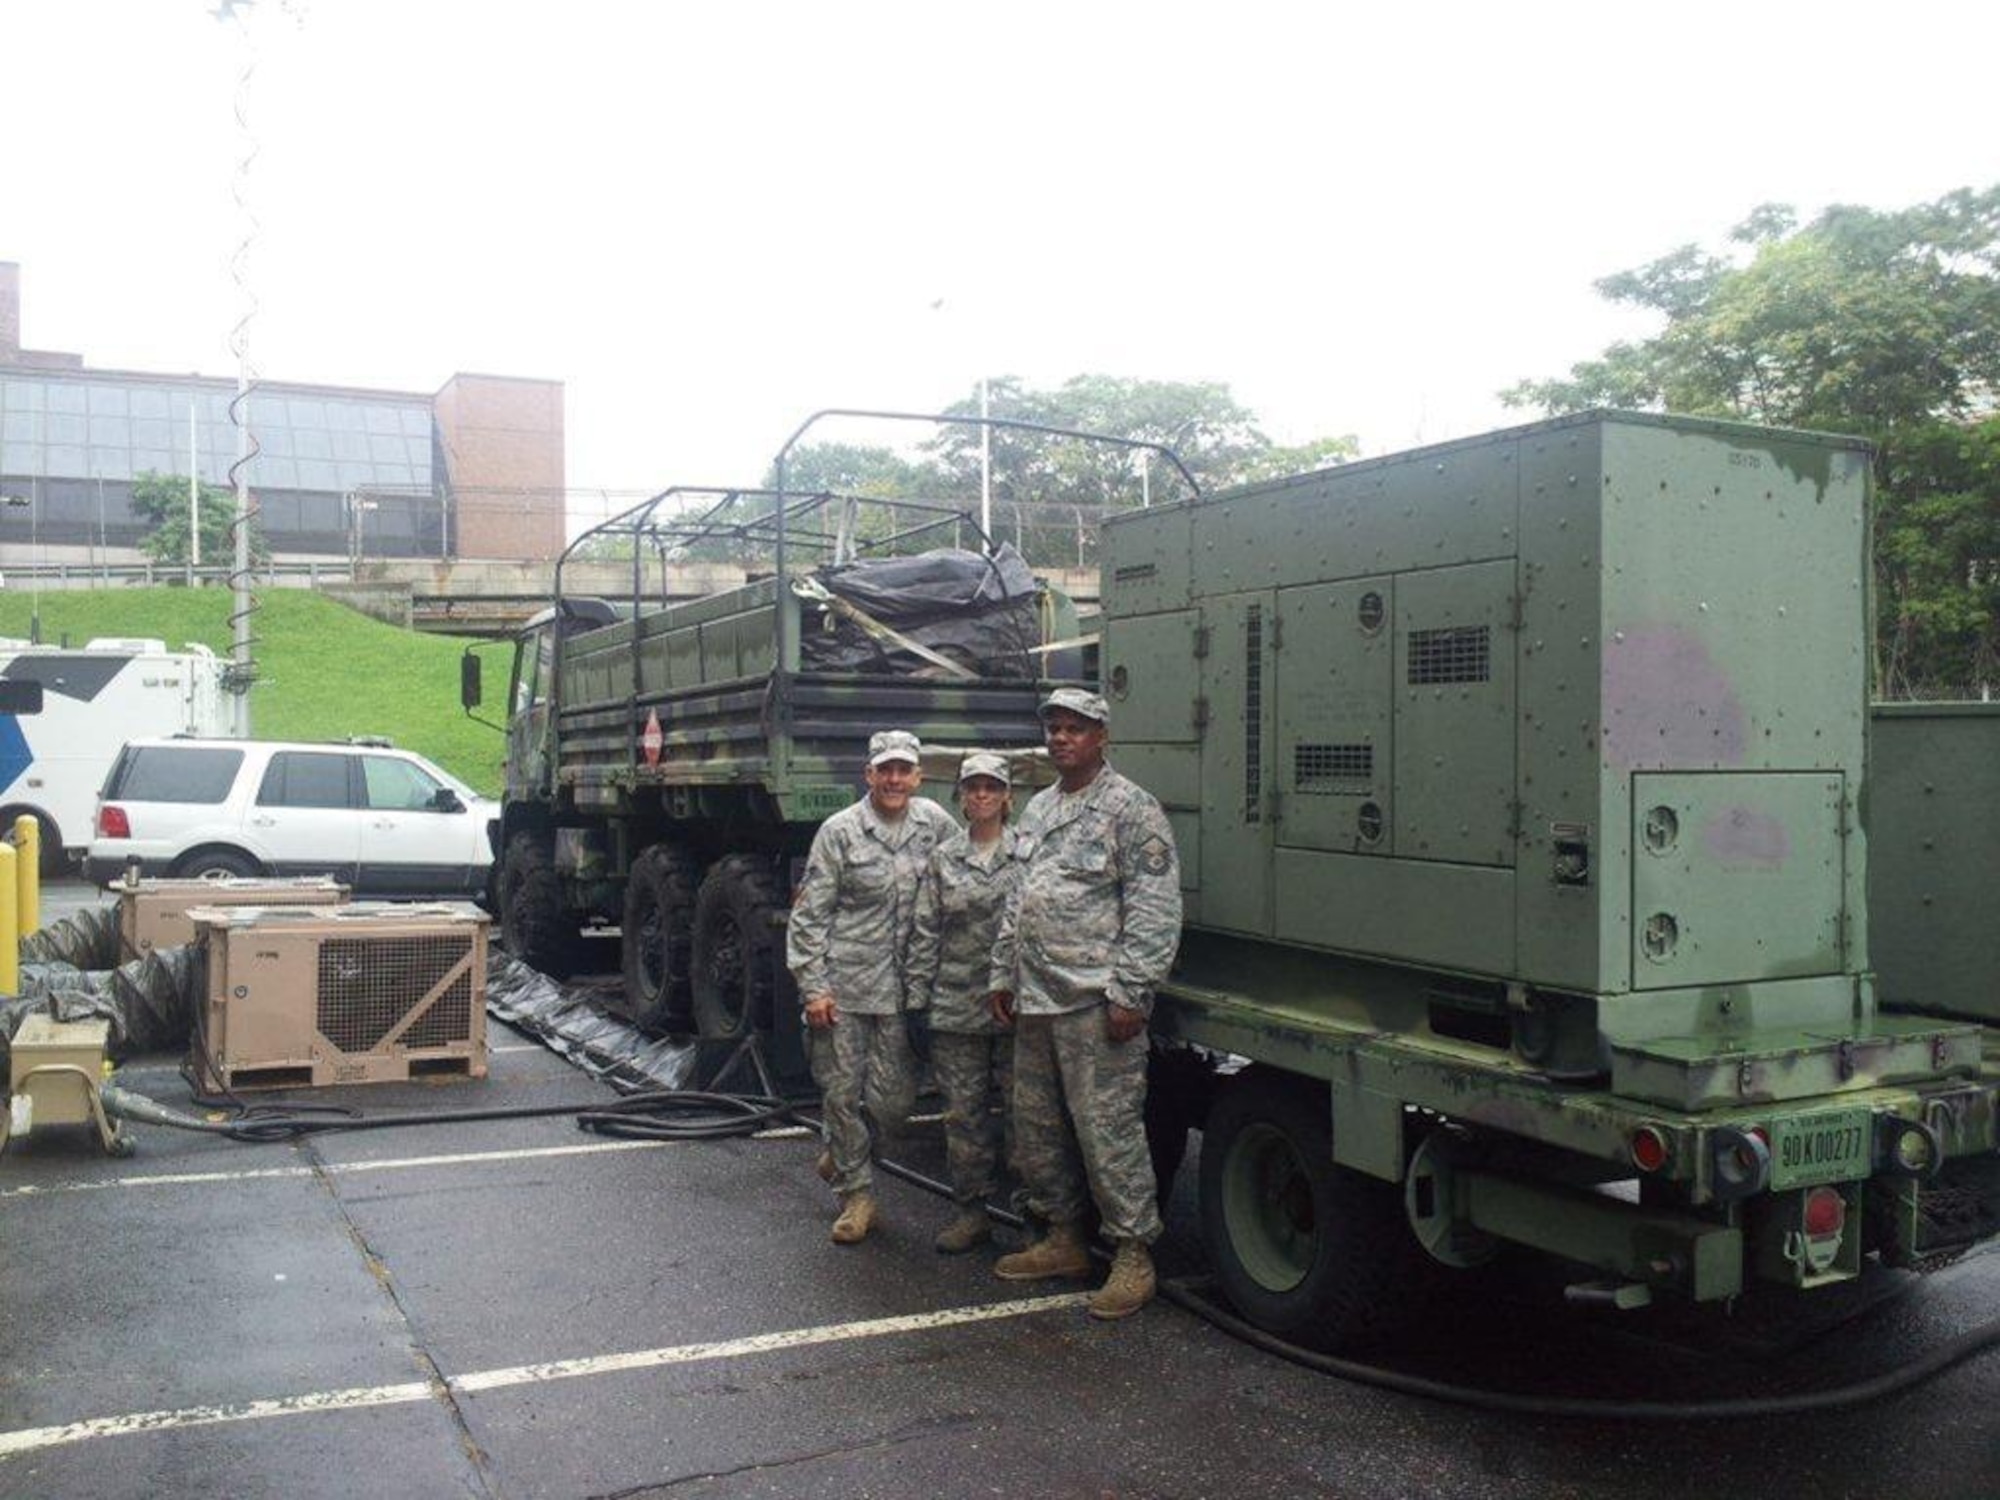 Connecticut Air National Guardsmen Tech. Sgt. John Anderson, Tech. Sgt. Rachel Payne and Master Sgt. Andre Jaynes stand with air conditioning units that were transported and set up at the Hartford Armory during storm-relief efforts is the wake of hurricane Irene August 2011. (Photo courtesy of 103rd ACS UPAR)